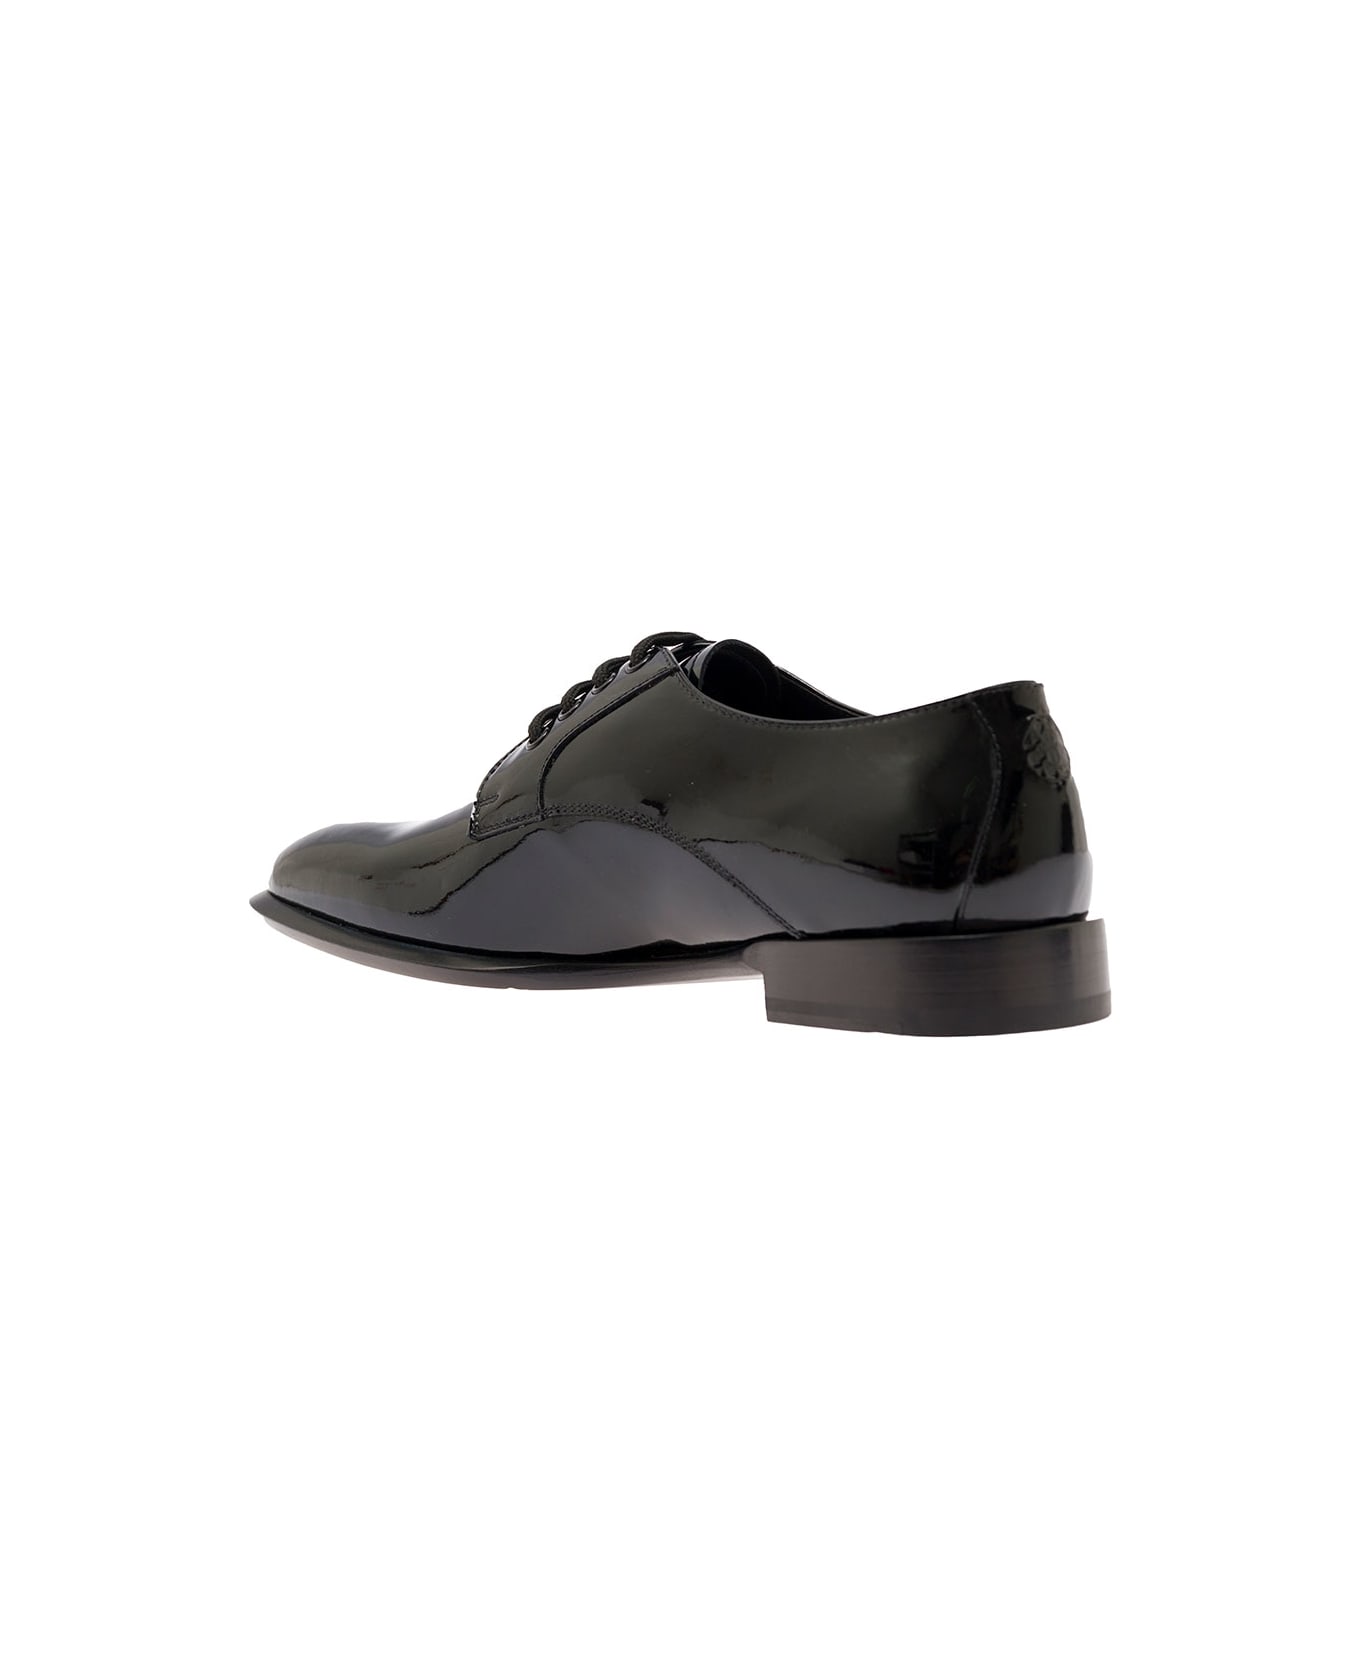 Alexander McQueen Black Oxford Shoes In Patent Leather Man - Black ローファー＆デッキシューズ